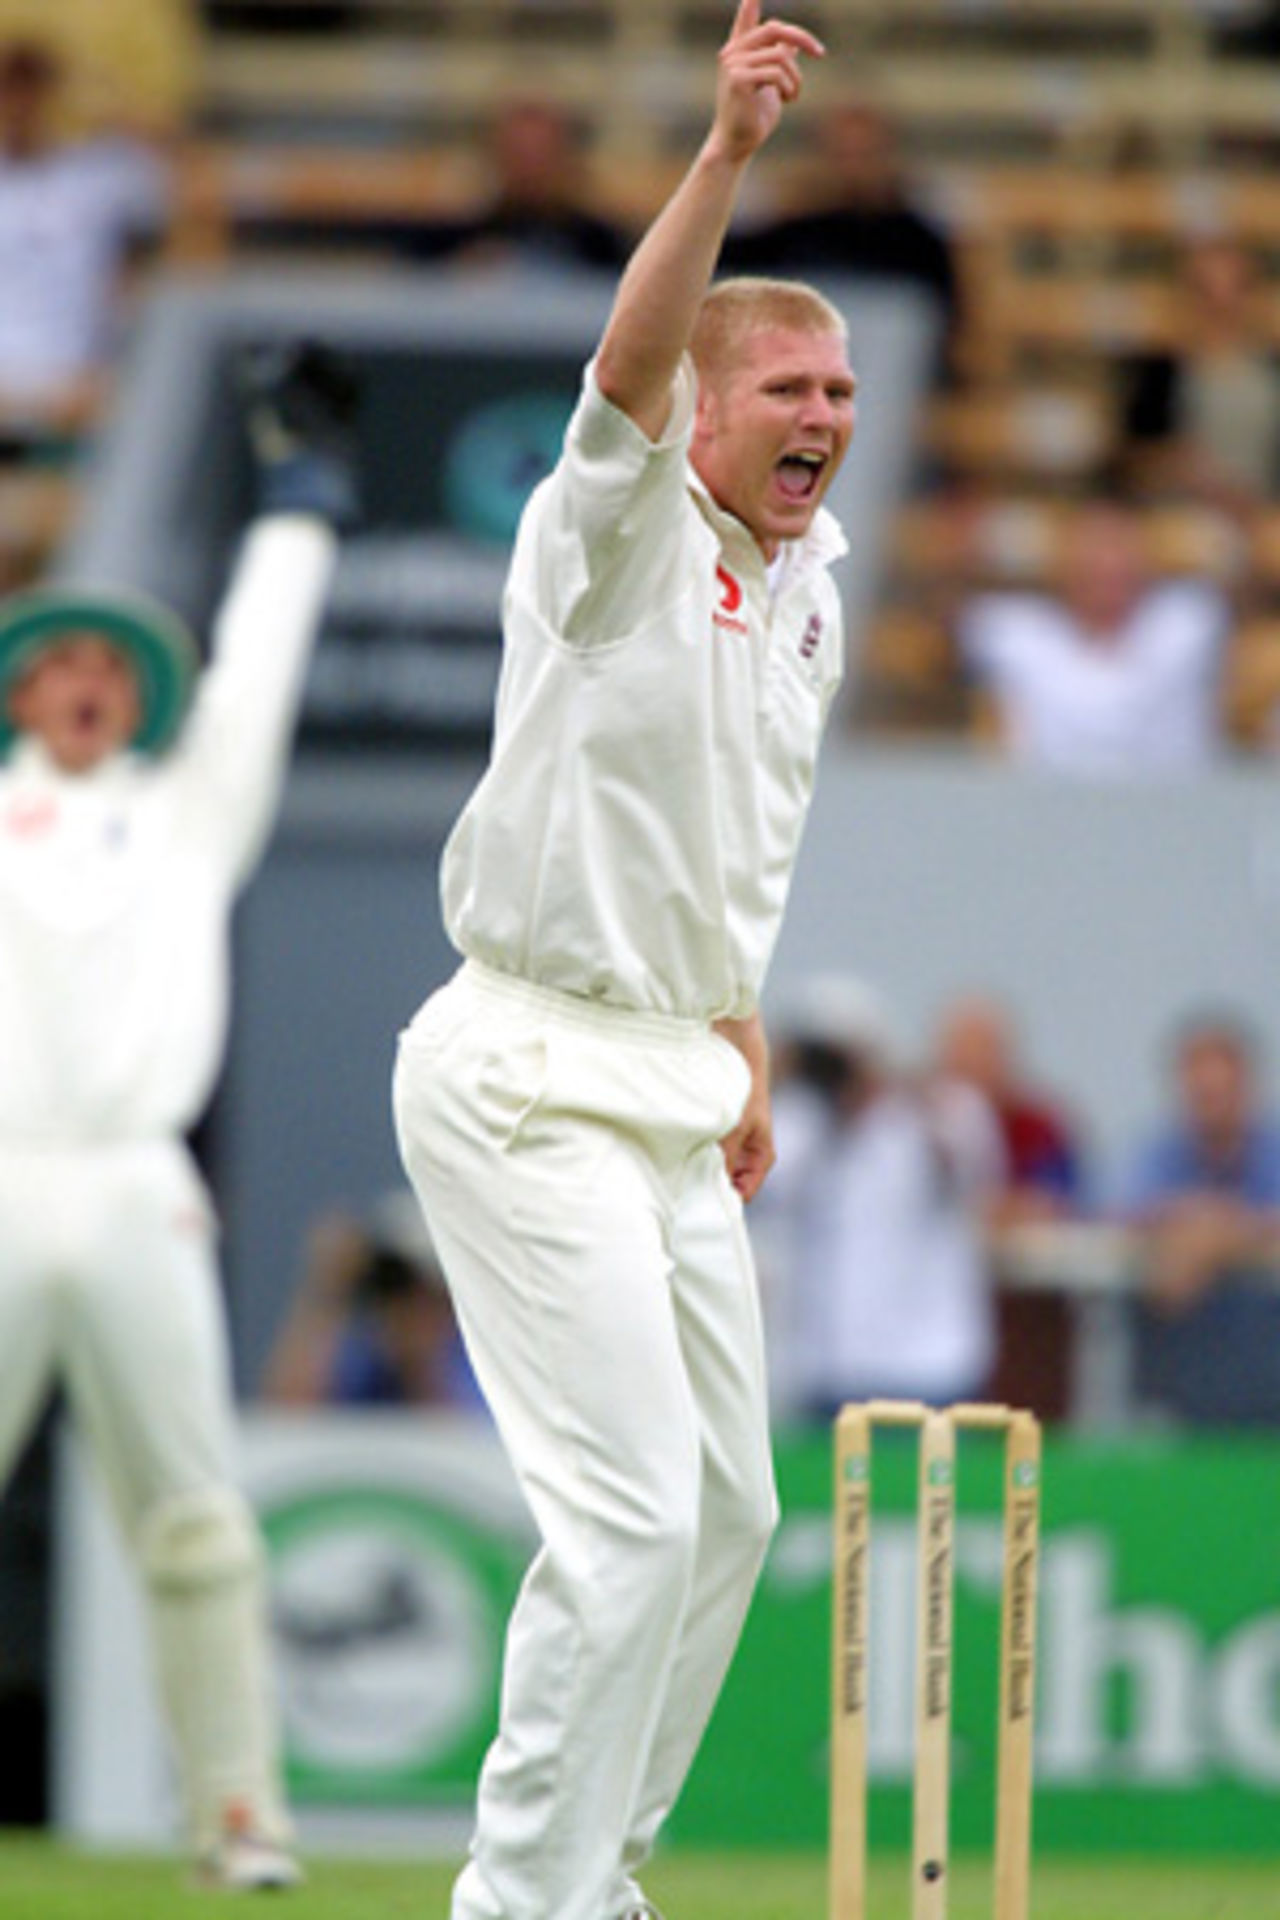 England bowler Matthew Hoggard successfully appeals for lbw against New Zealand batsman Mark Richardson. Richardson was dismissed for two. 1st Test: New Zealand v England at Jade Stadium, Christchurch, 13-17 March 2002 (13 March 2002).